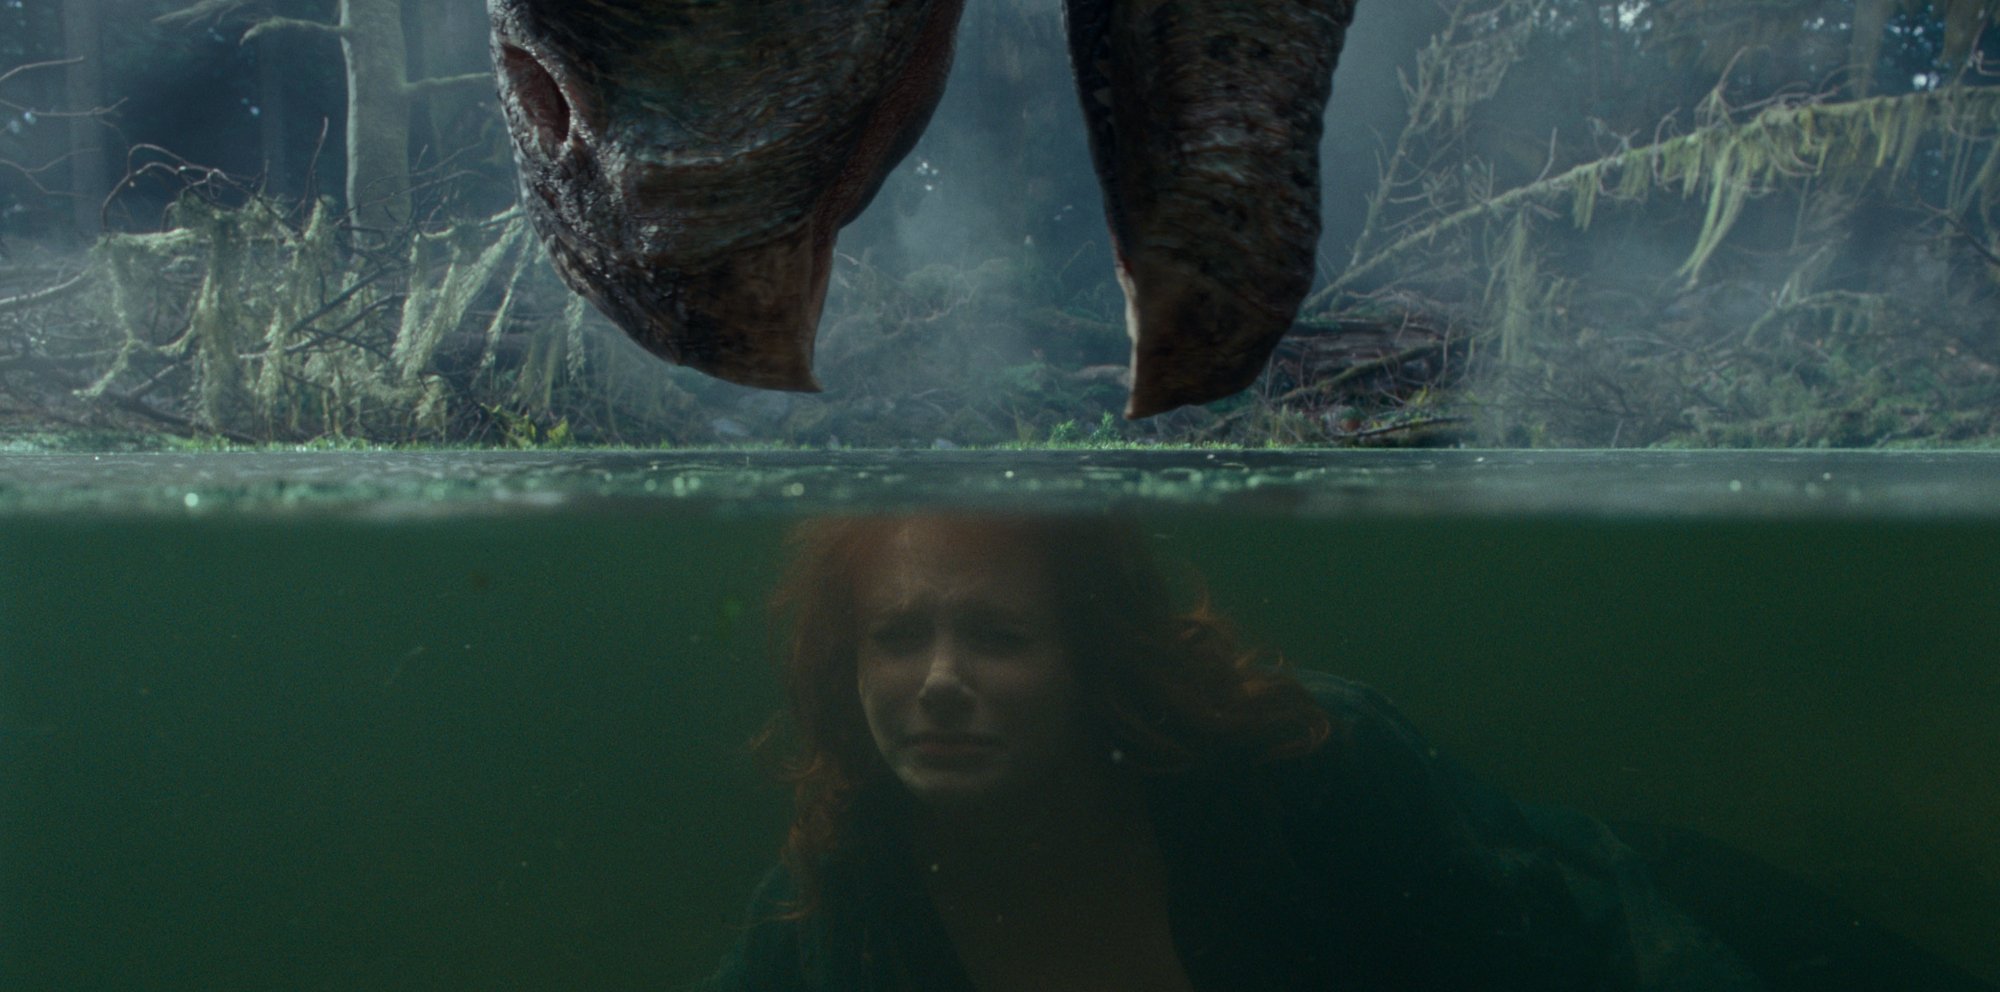 'Jurassic World Dominion' Therizinosaurus and Bryce Dallas Howard as Claire Dearing. The Therizinosaurus is lowering its mouth toward the water with Howard holding her breath under water.